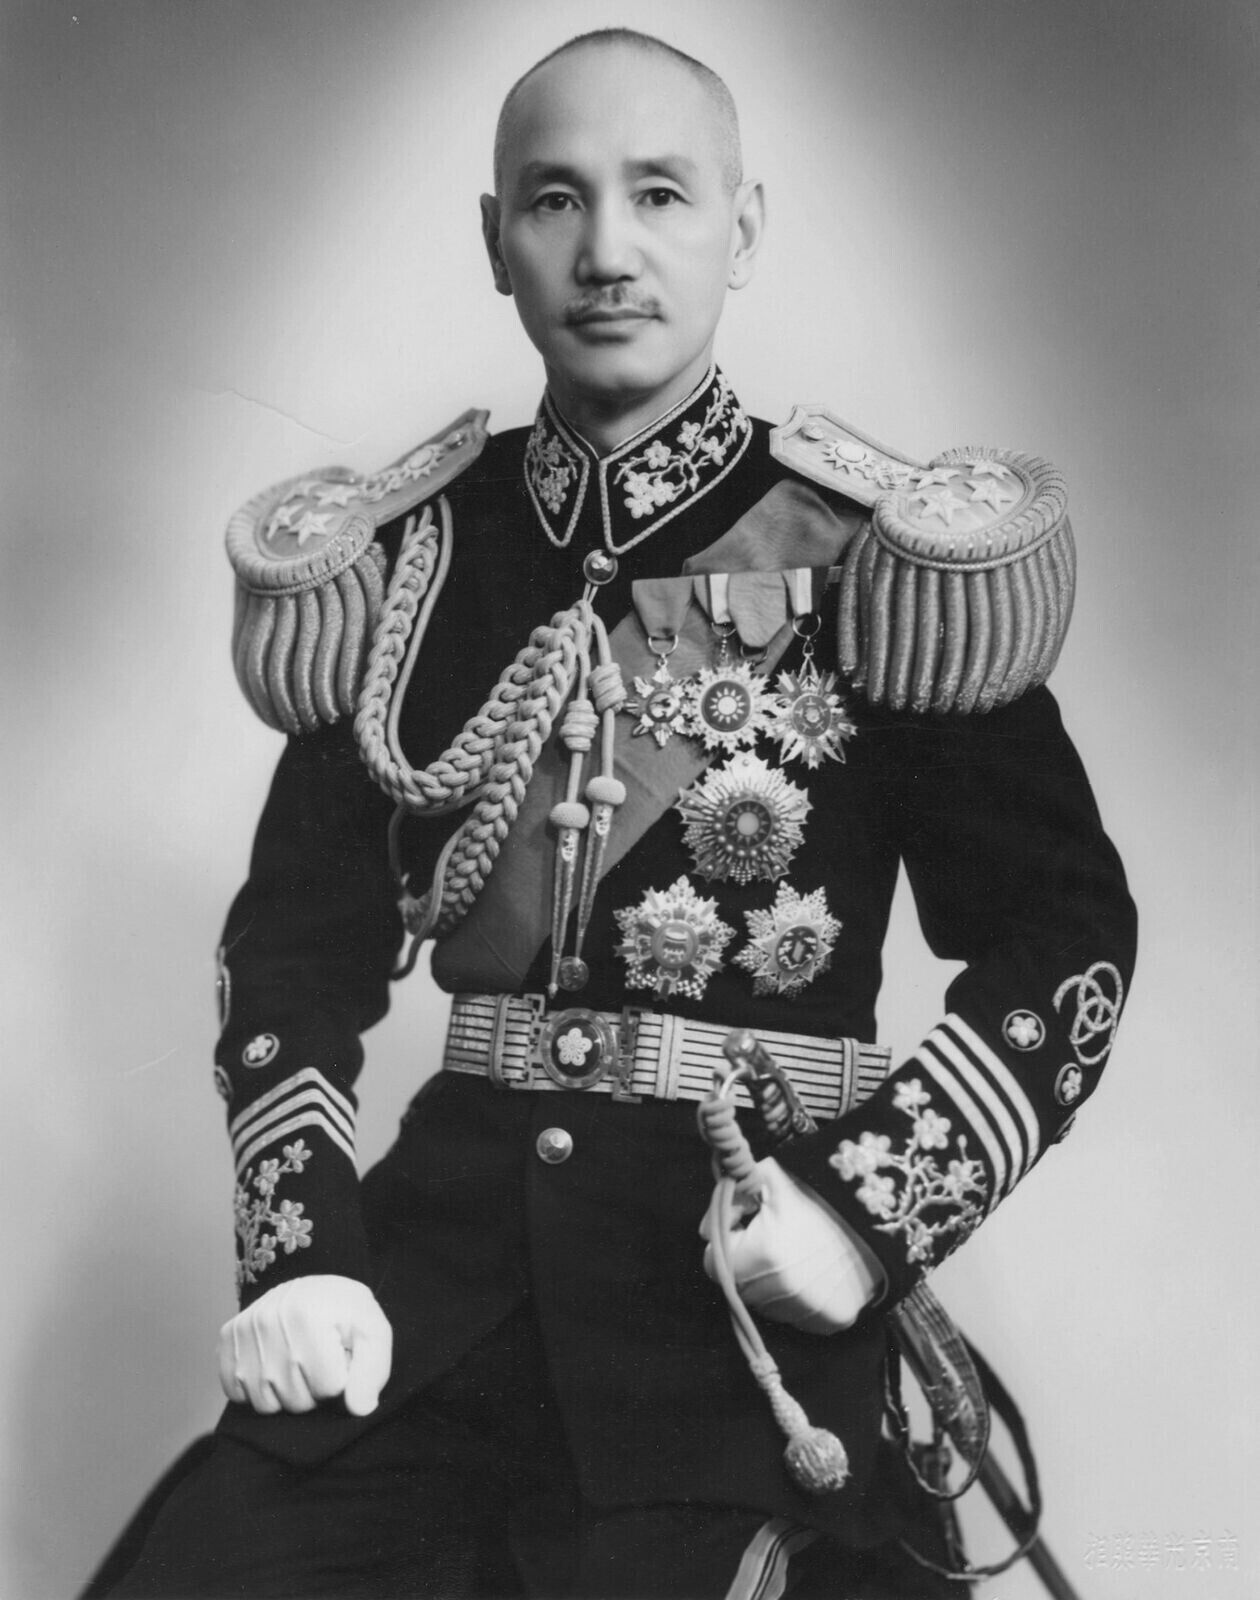 1940 CHINESE LEADER Chiang Kai-shek Historic Picture Photo 5x7